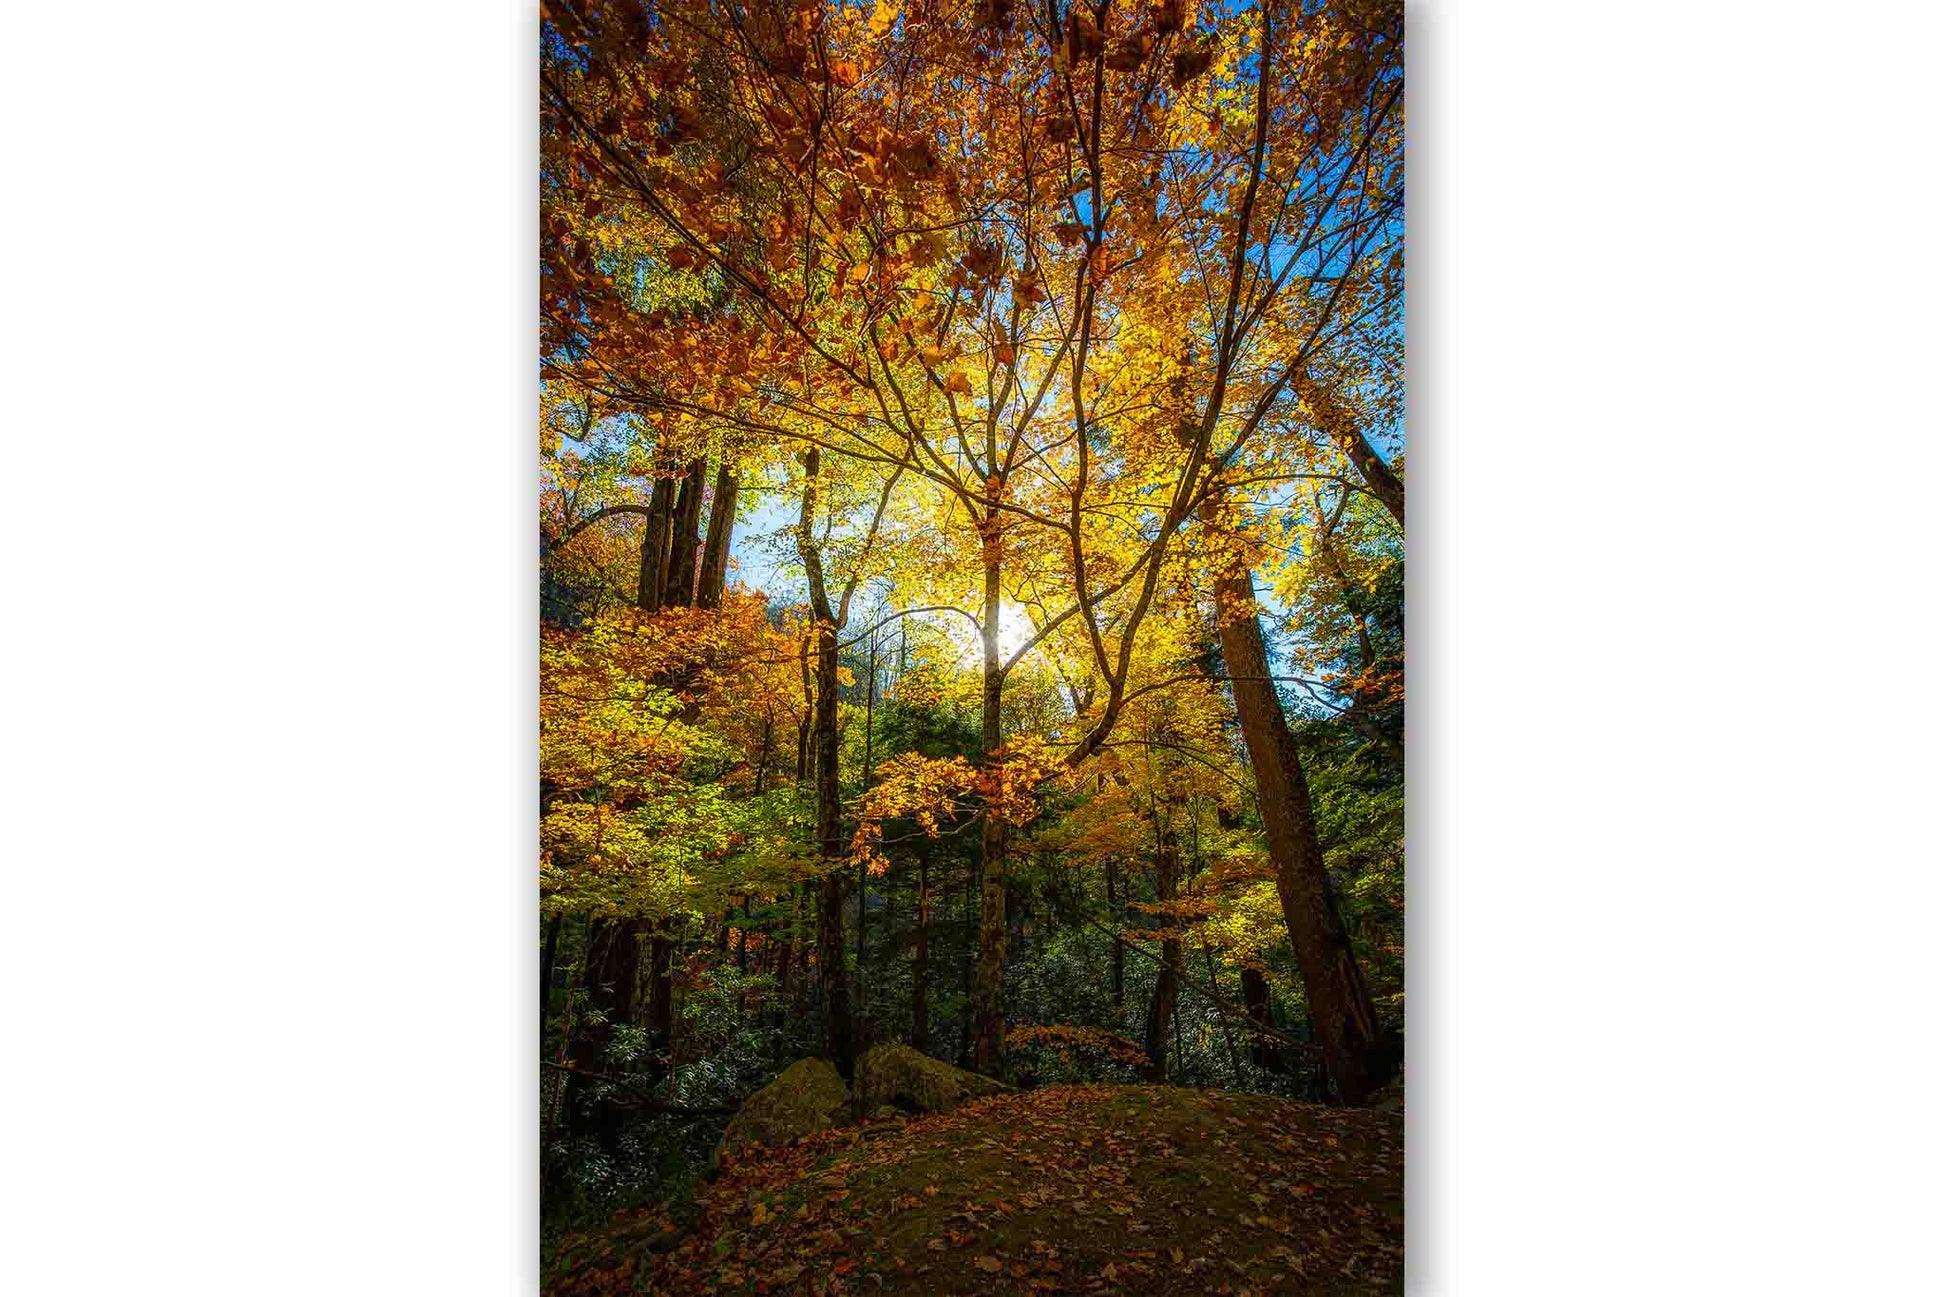 Vertical autumn photography print of sunlight illuminating leaves on the trees in a forest in the Great Smoky Mountains of Tennessee by Sean Ramsey of Southern Plains Photography.